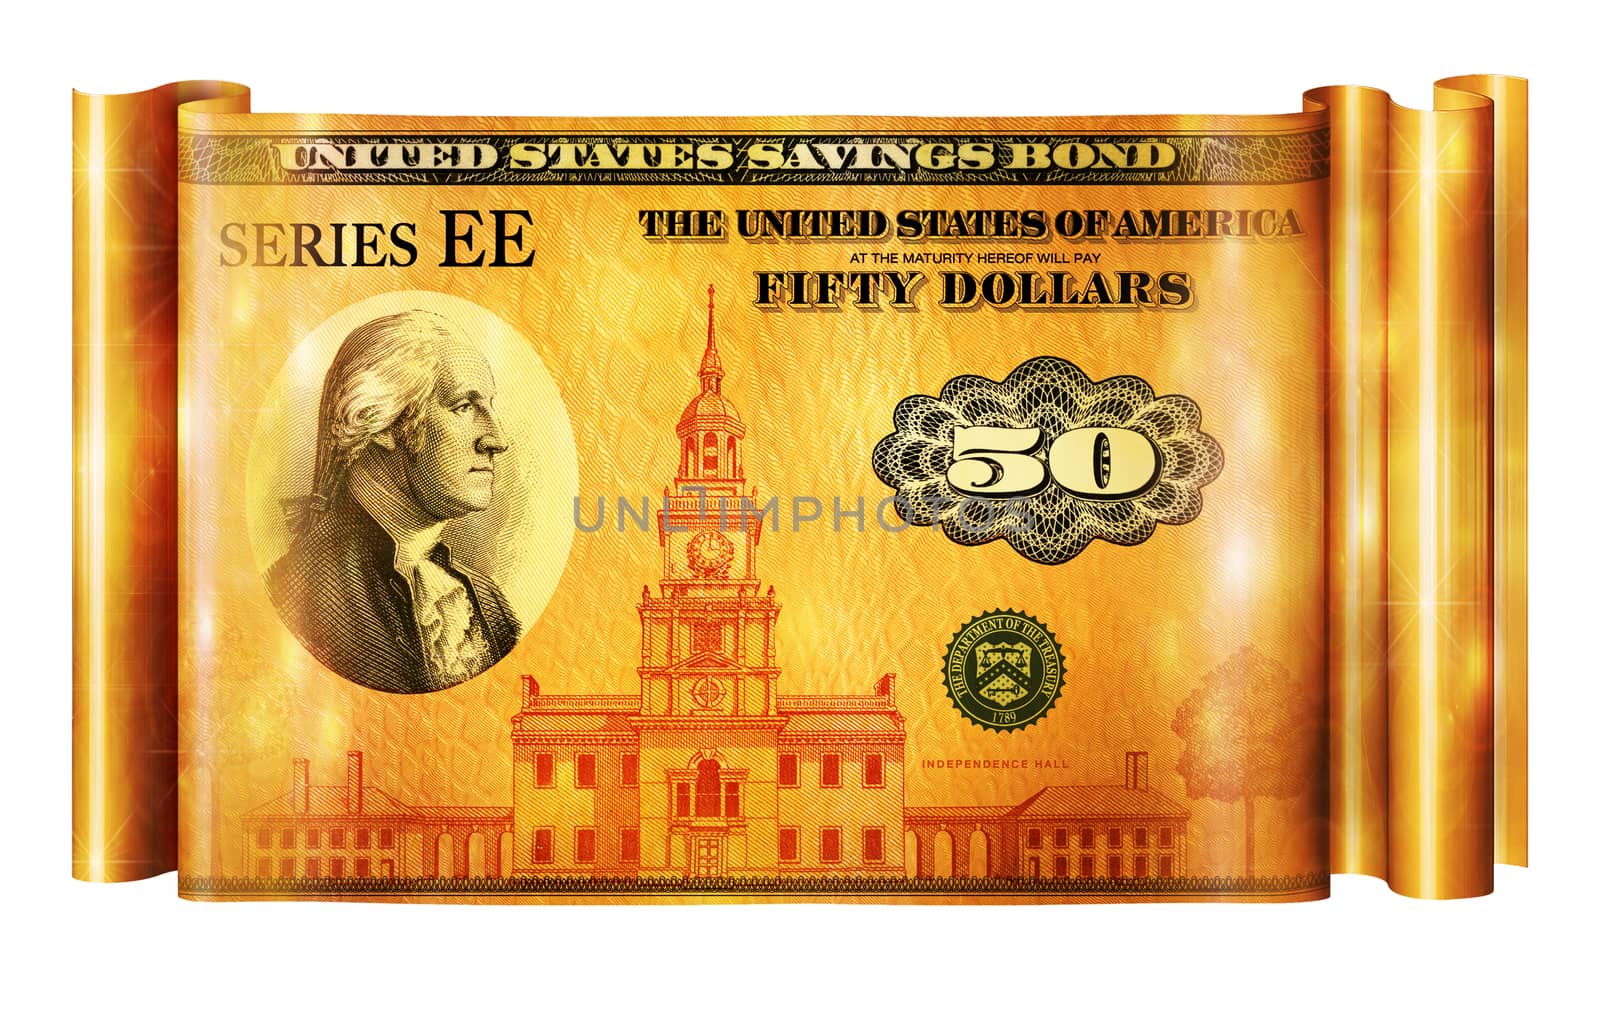 Photo Illustration of a U.S. Savings Bond retouched and re-illustrated to create a gold banner.